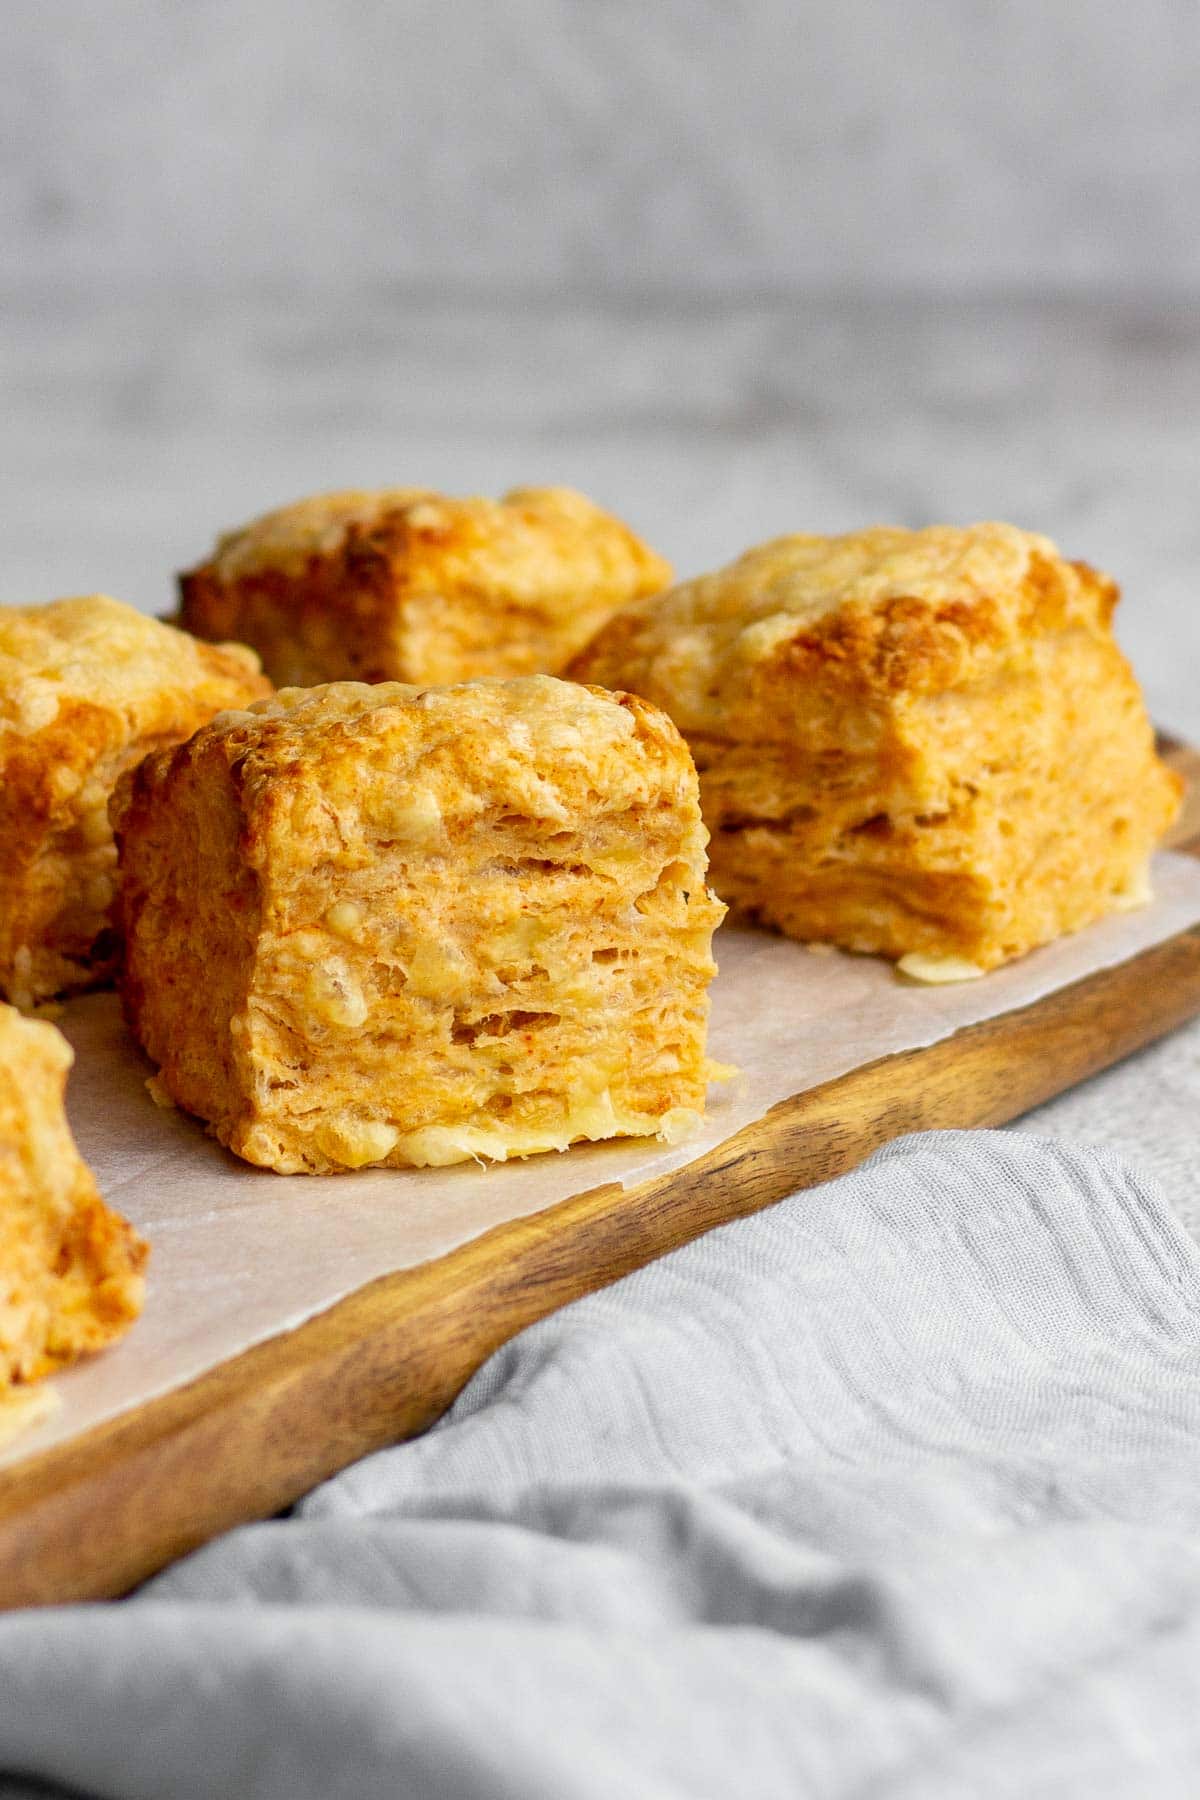 Spicy Cheese Scones (Cheese Biscuits)